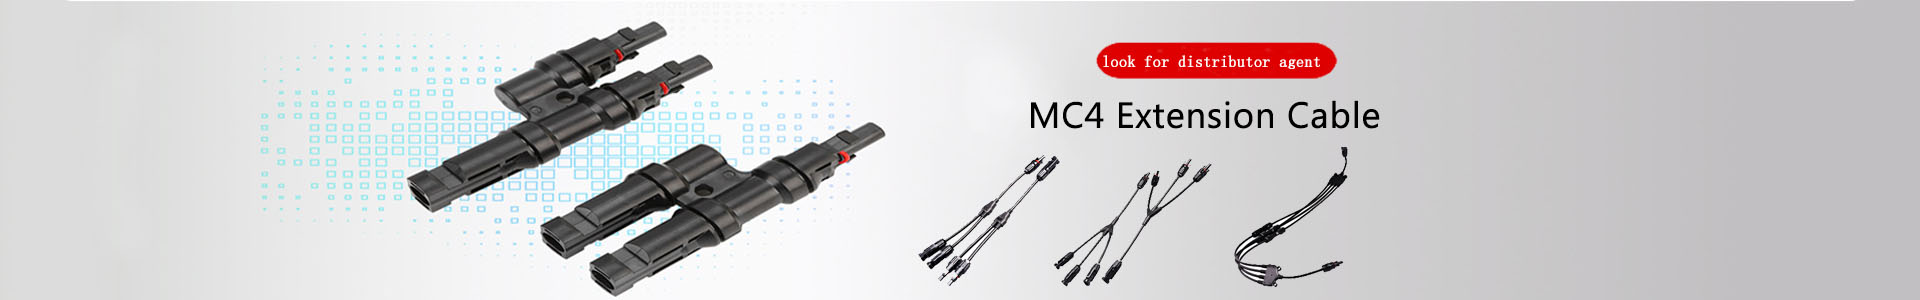 News | Handwe Group-Solar | solar connector,solar branch connector,diode fuse connector,MC4 extnsion cable,H1Z2Z2 solar cable, UL4703 solar cable | Leading manufacturer and supplier of solar pv cables and connectors